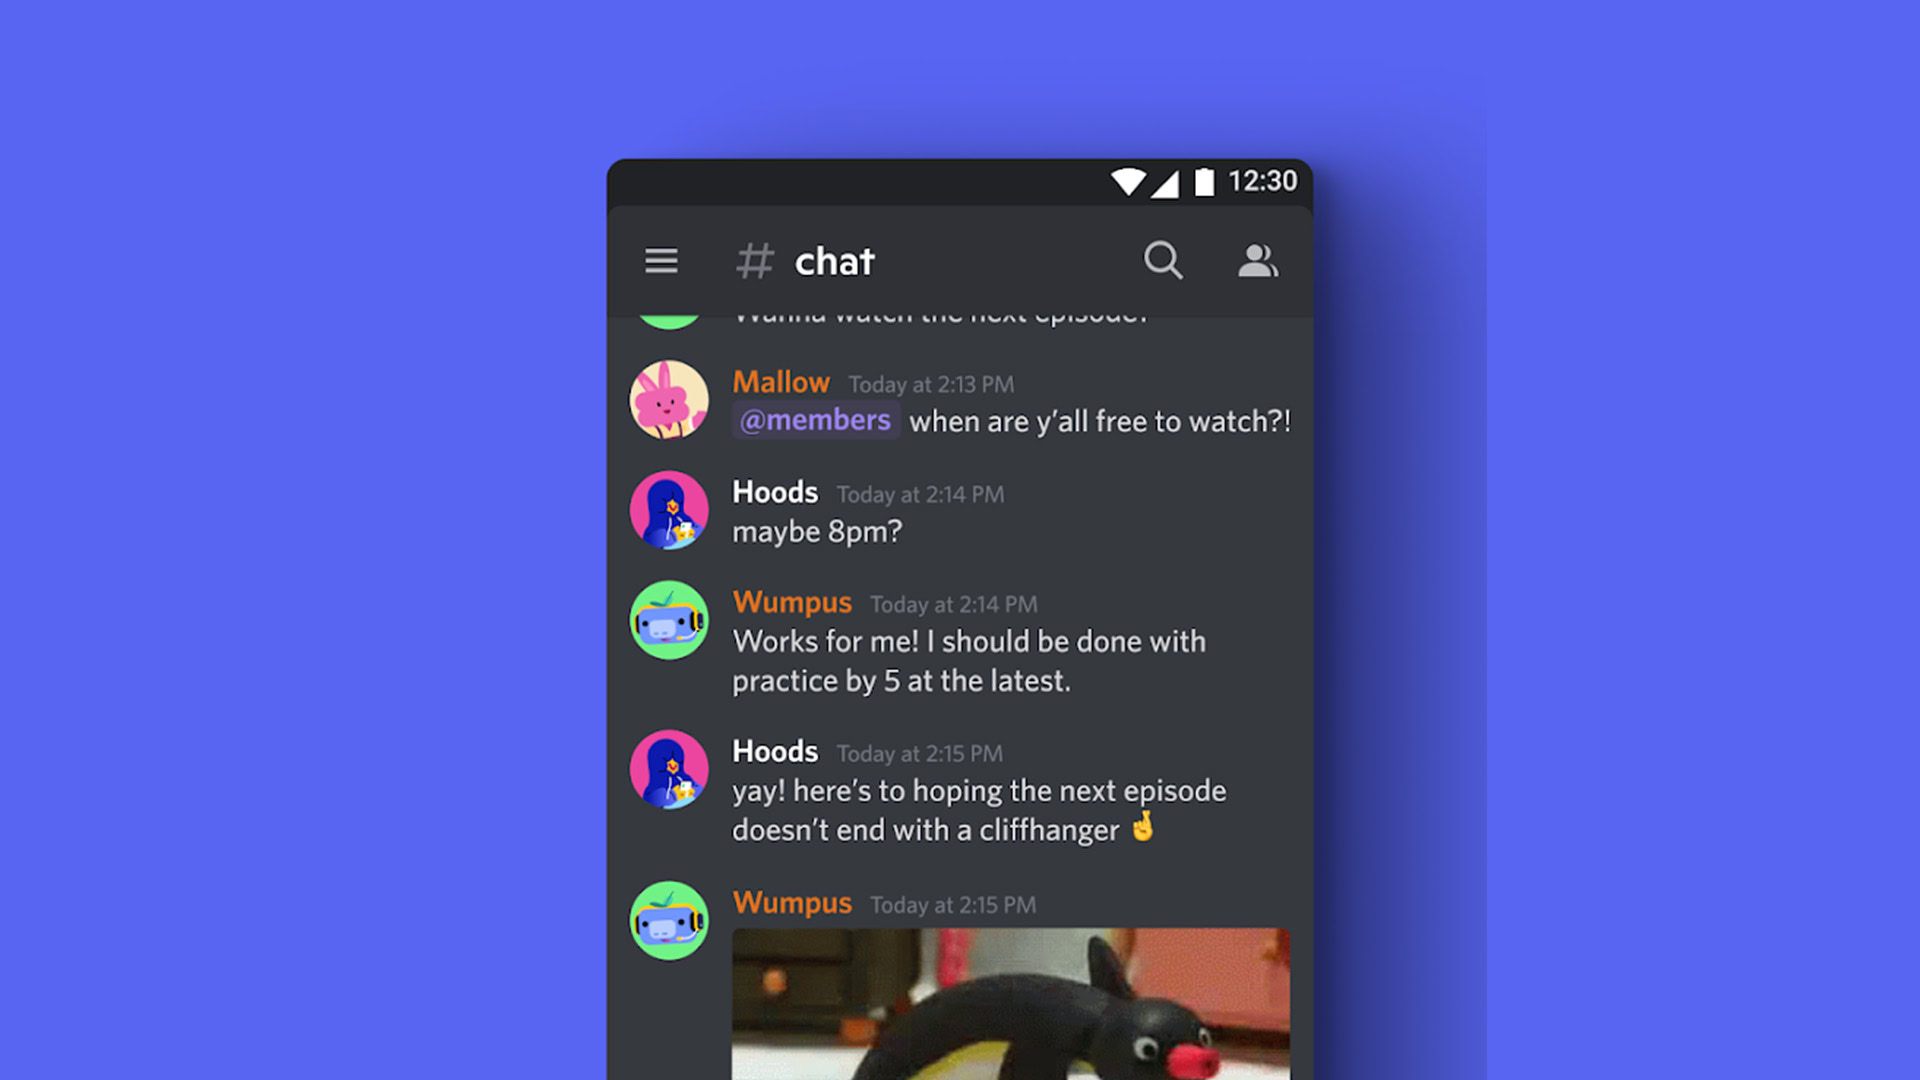 Discord best chat room apps for Android